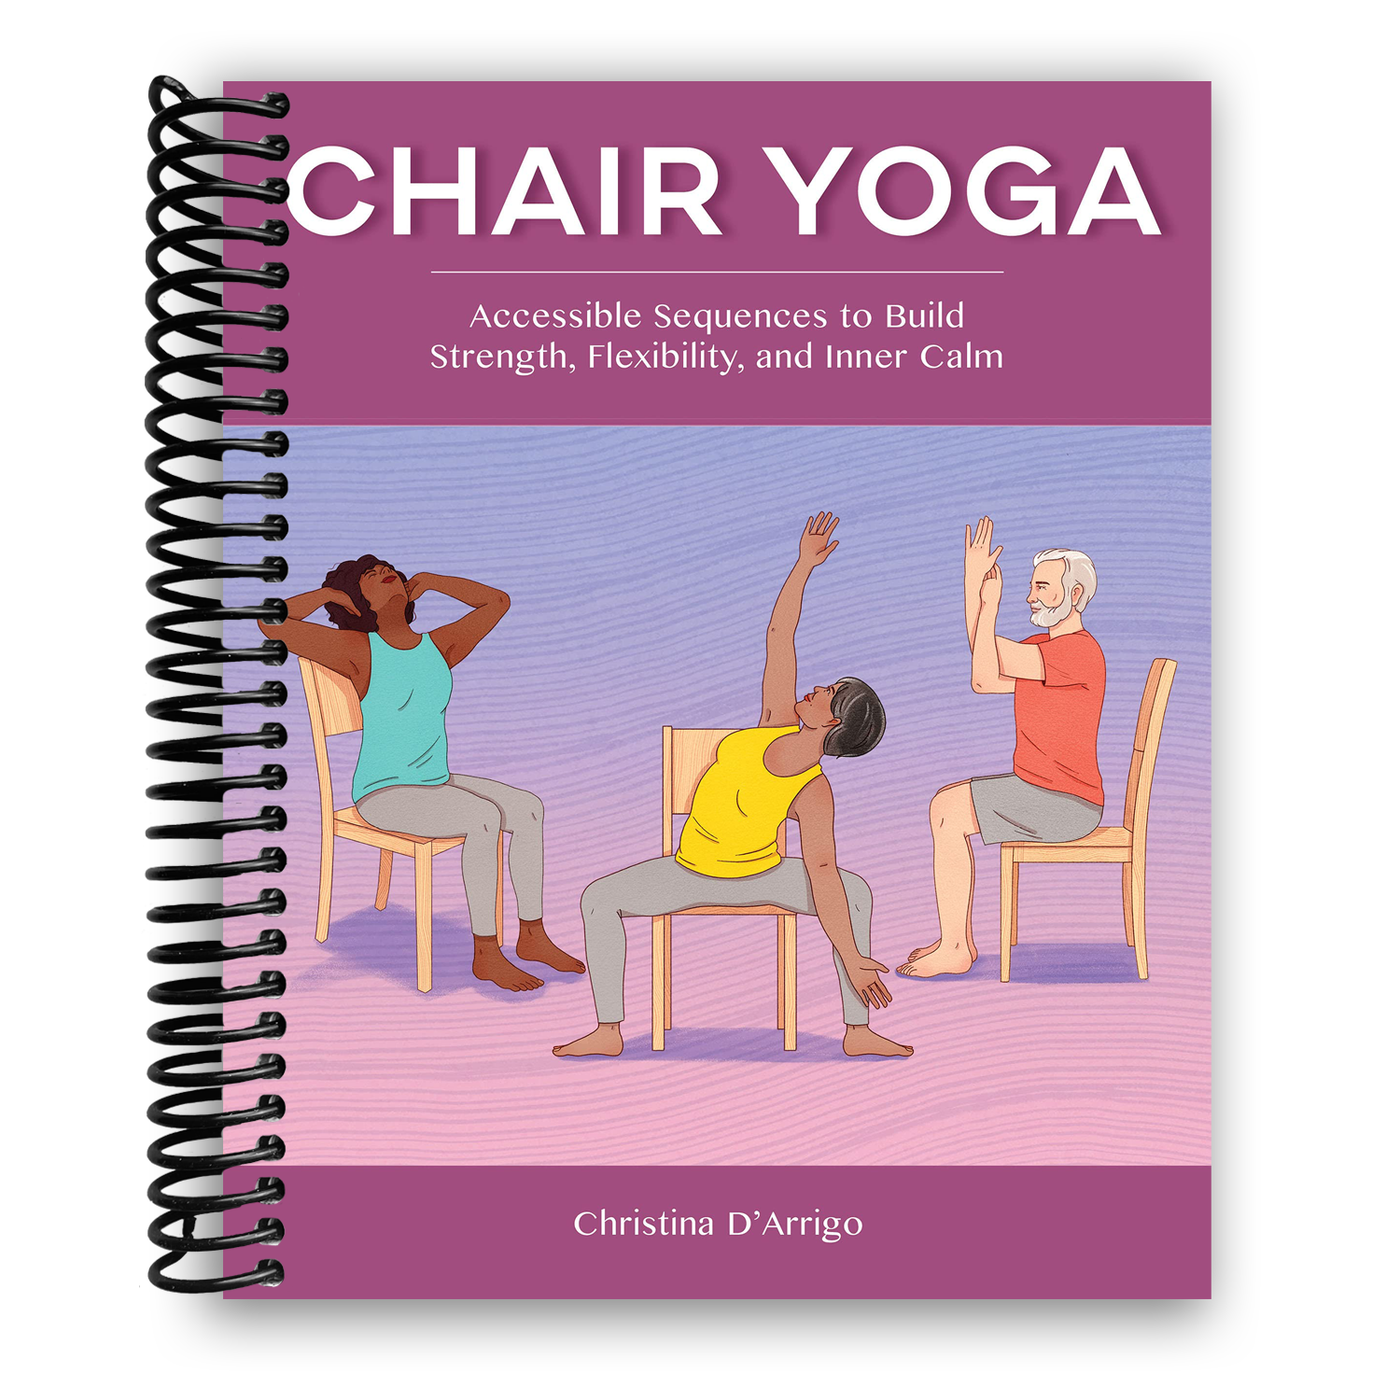 Chair Yoga: Accessible Sequences to Build Strength, Flexibility, and Inner Calm (Spiral Bound)